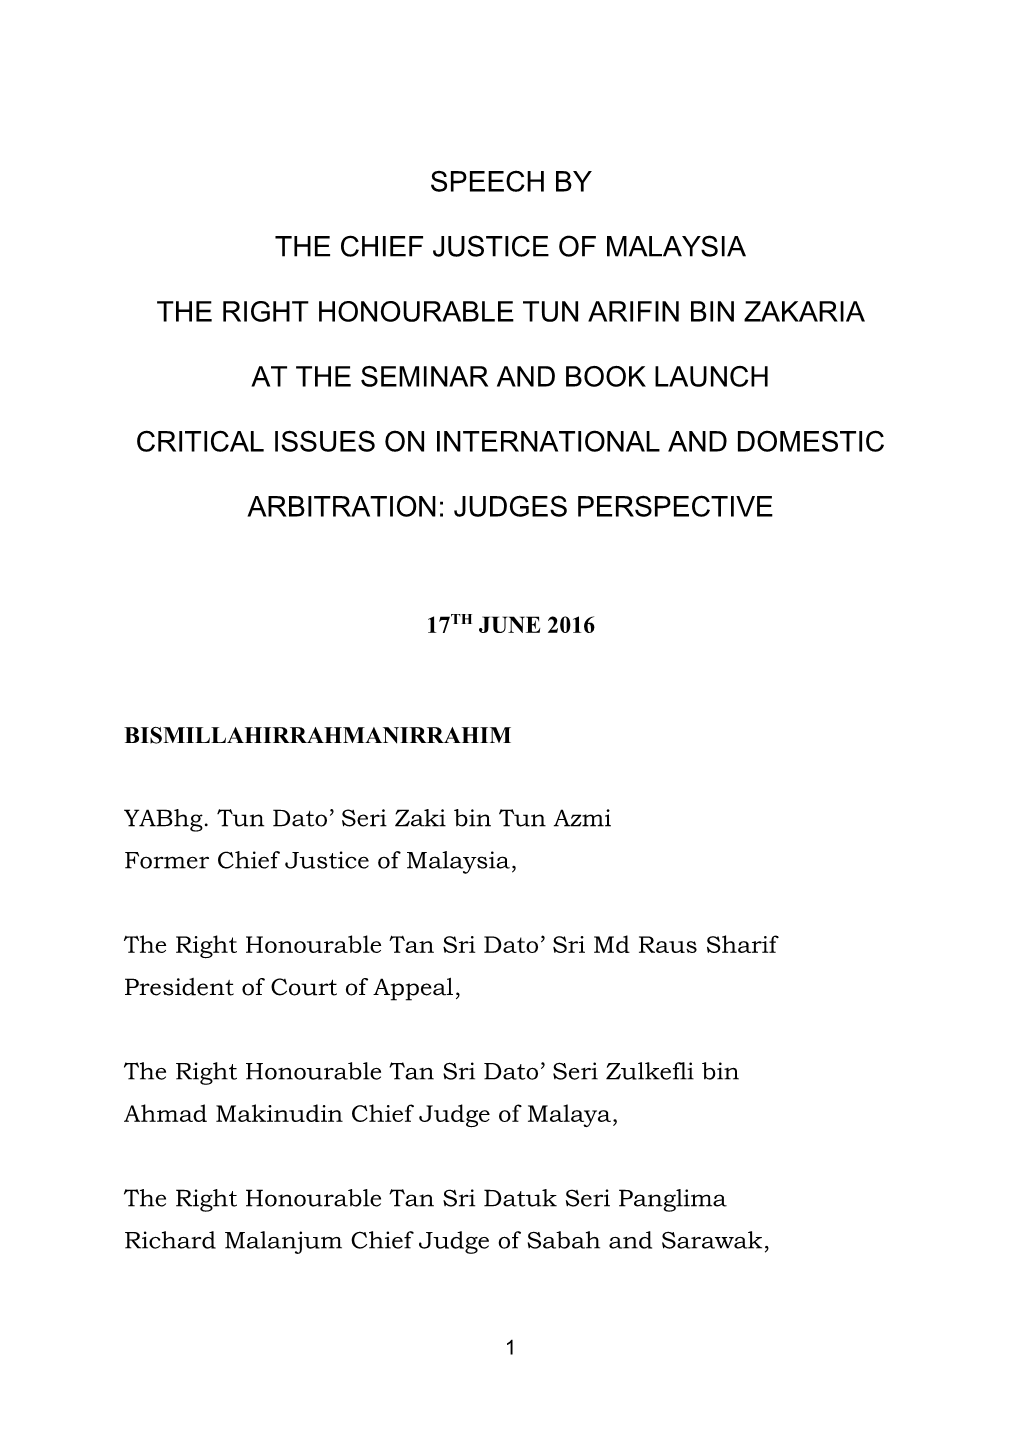 Speech by the Chief Justice of Malaysia the Right